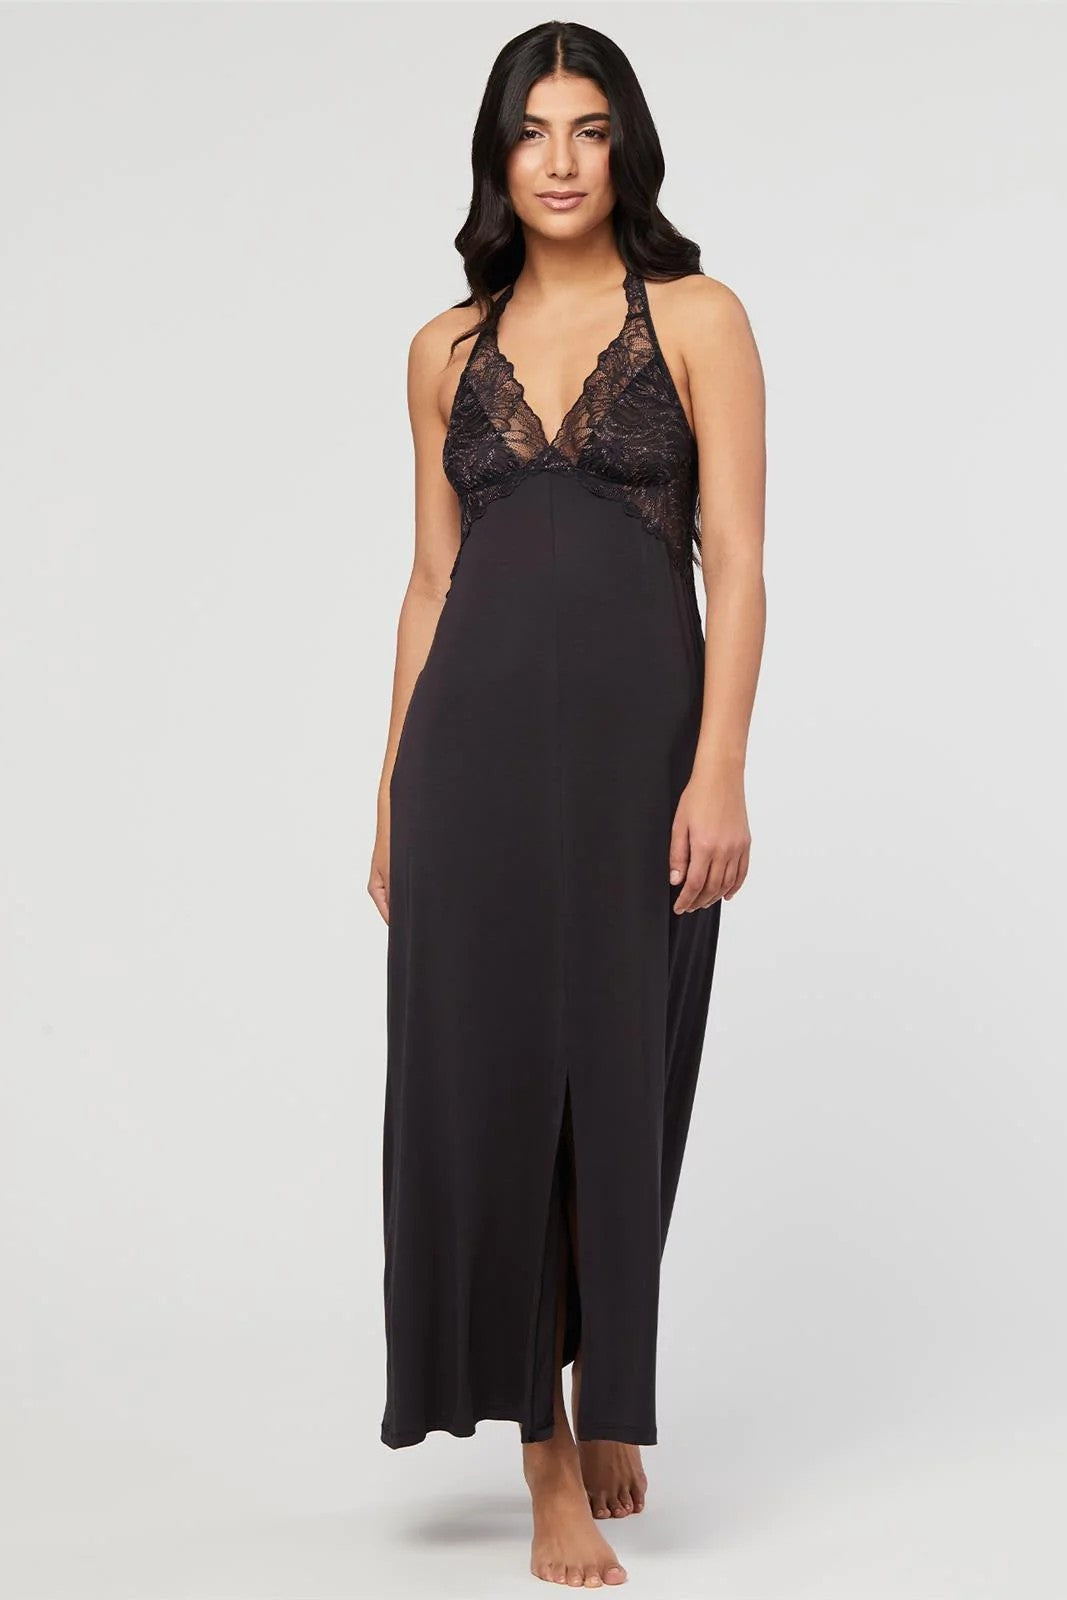 Women's Nightgowns: buy Nightgowns For Women online at Bralissimo